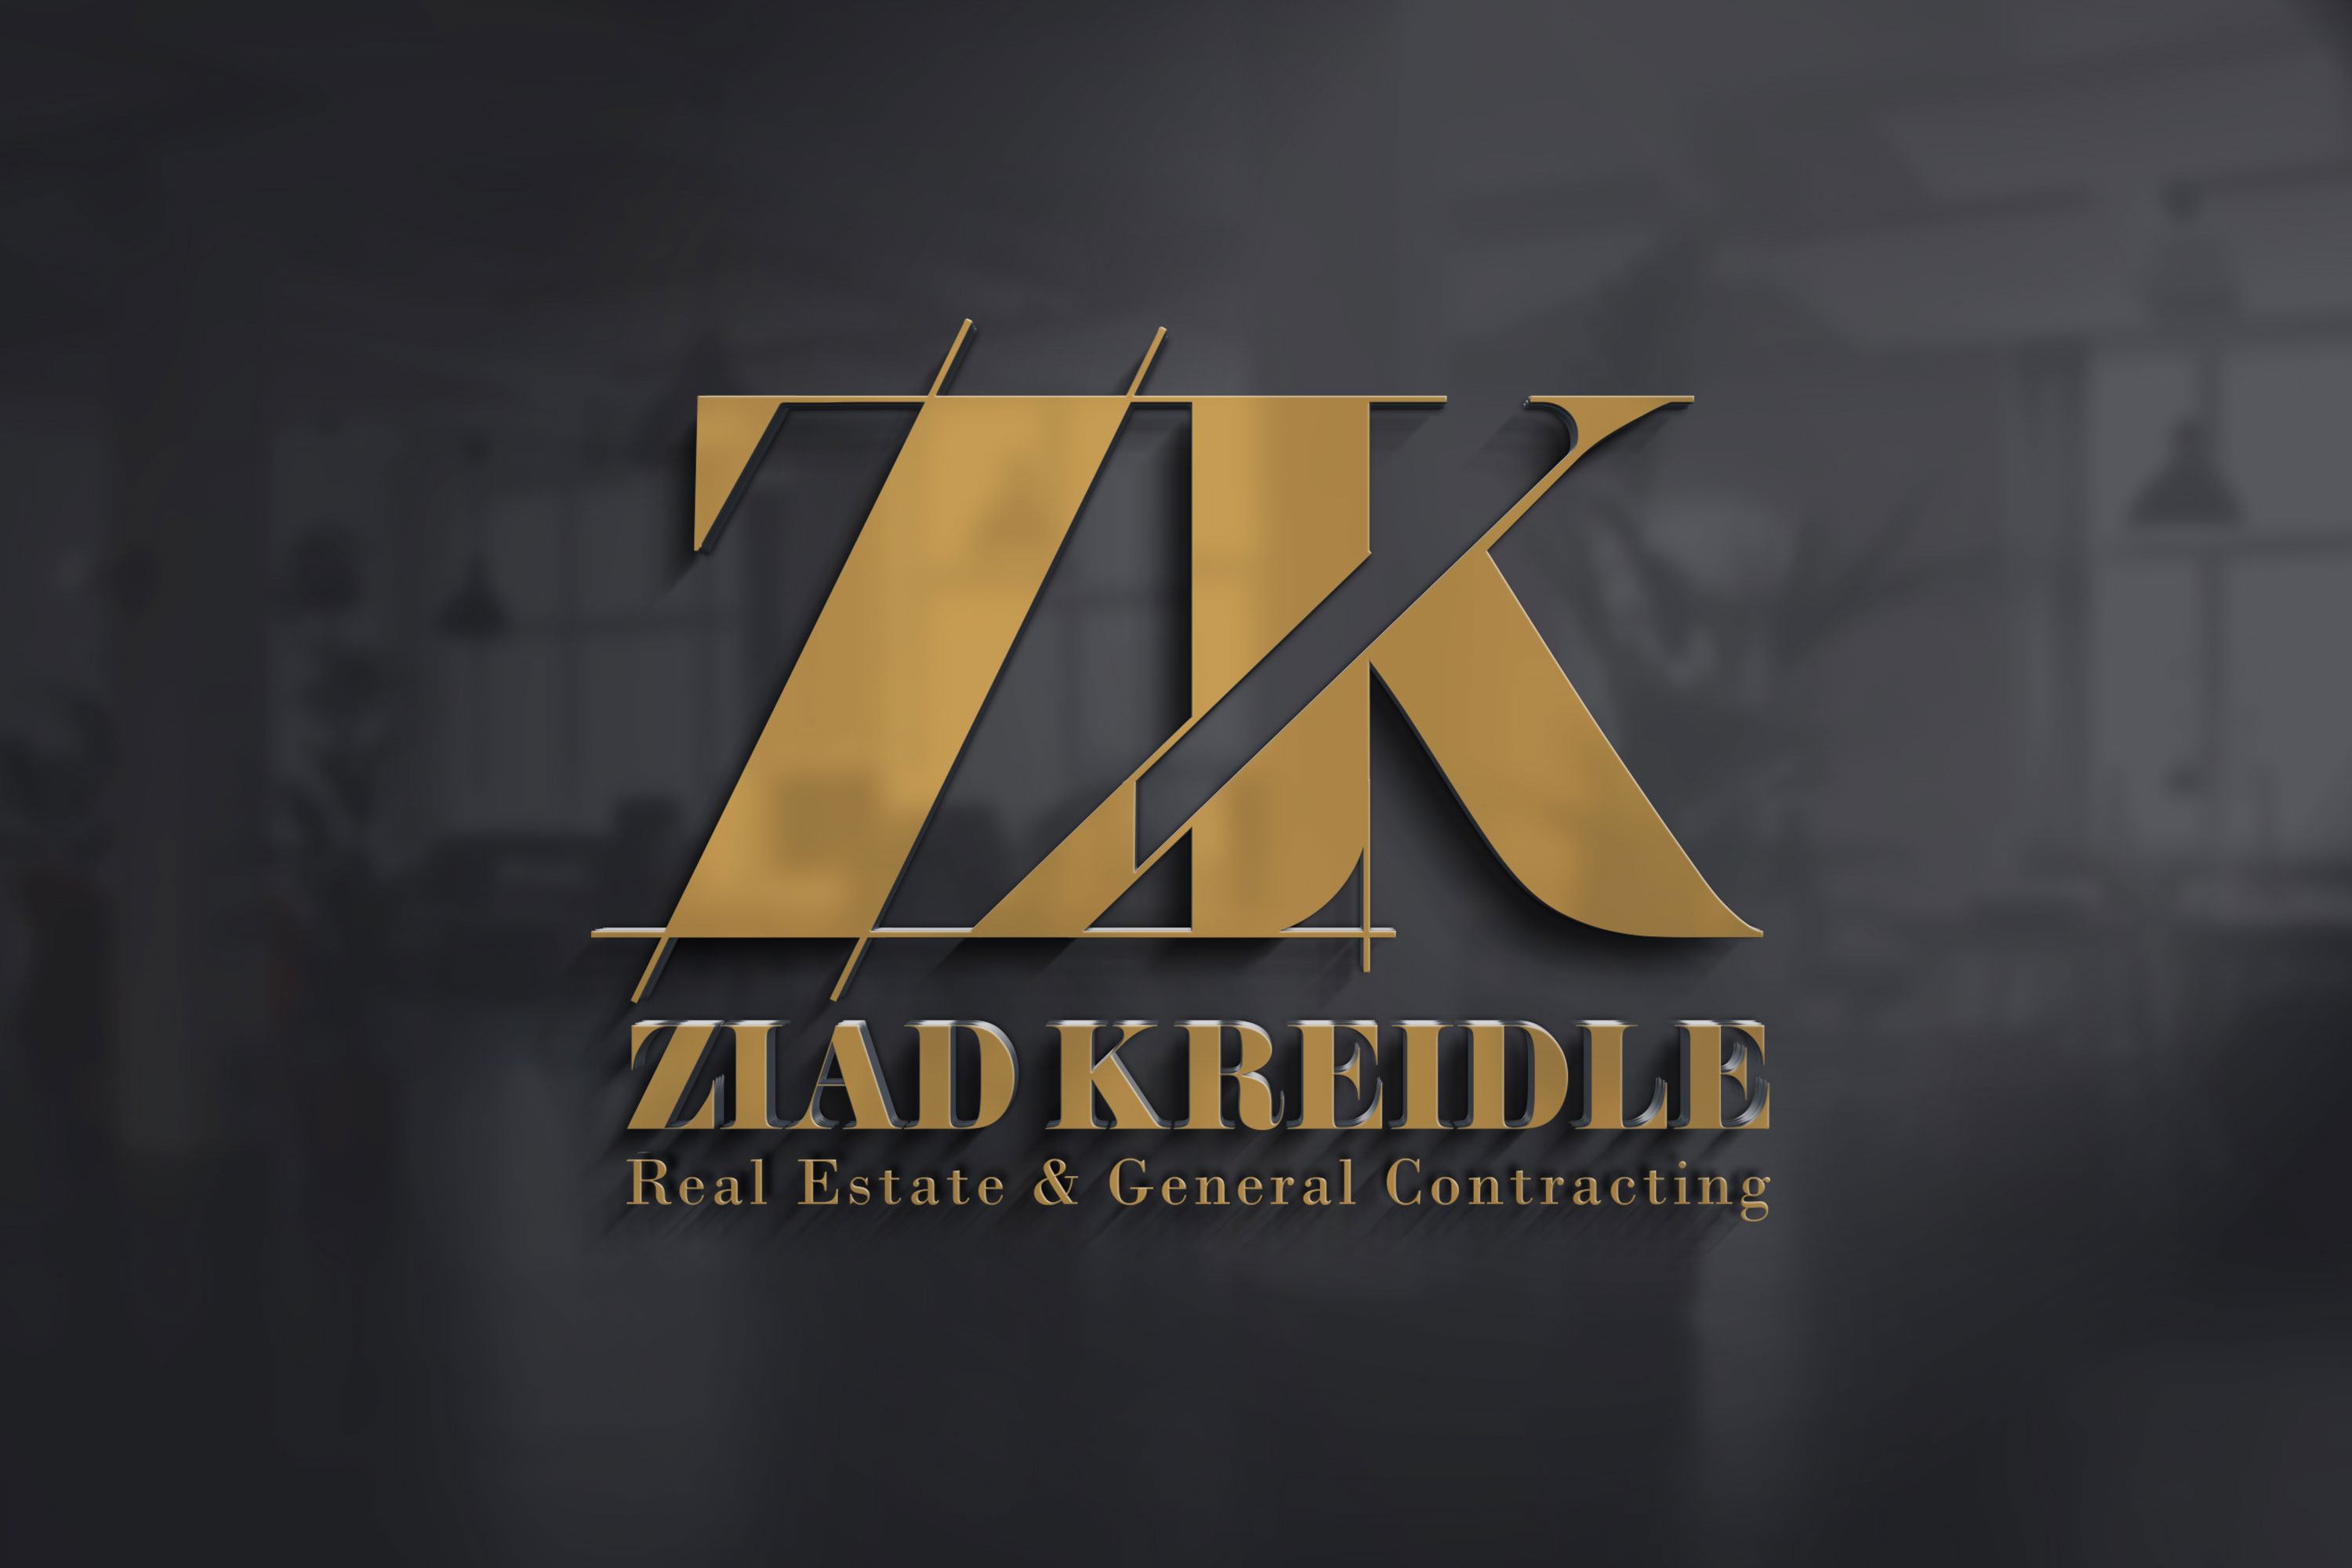 contracting and real estate logo by digitiz studio